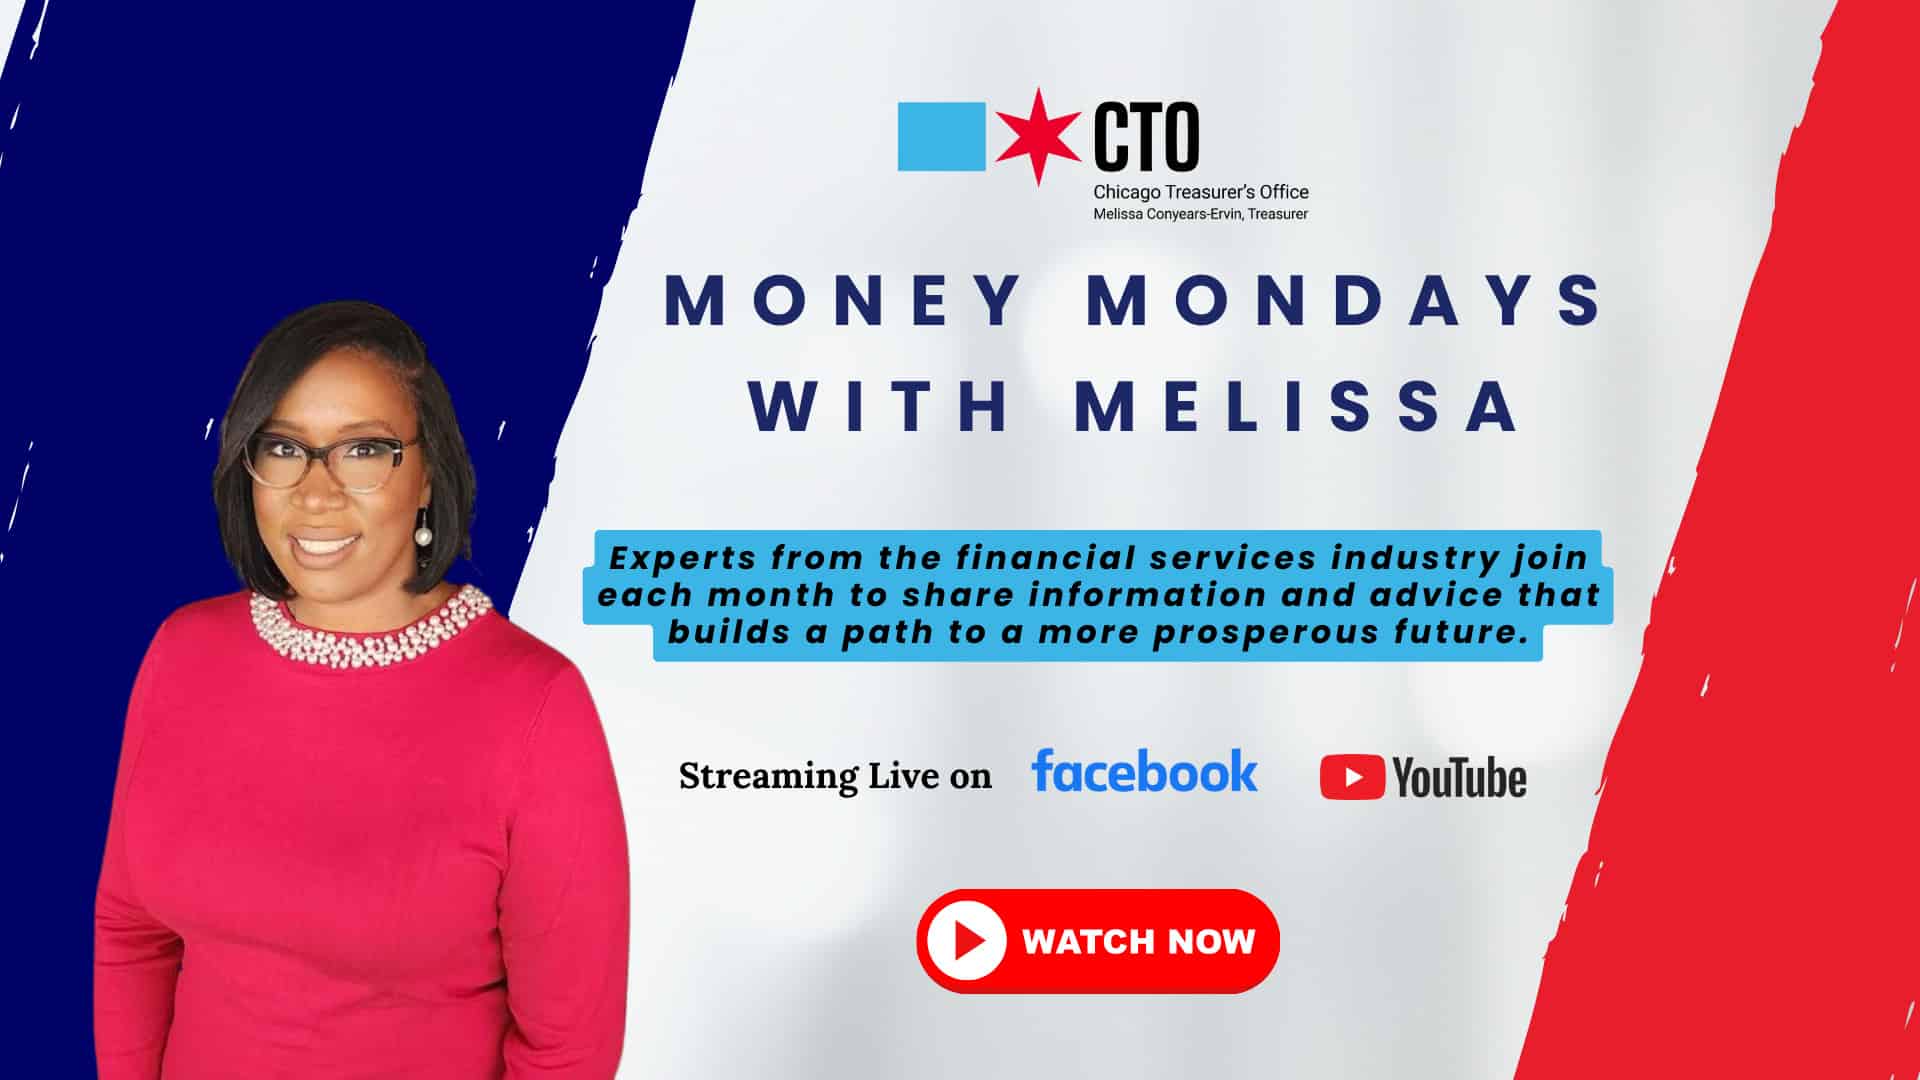 Money Mondays with Meliisa. Experts from the financial services industry join each month to share information and advice that builds a path to a more prosperous future